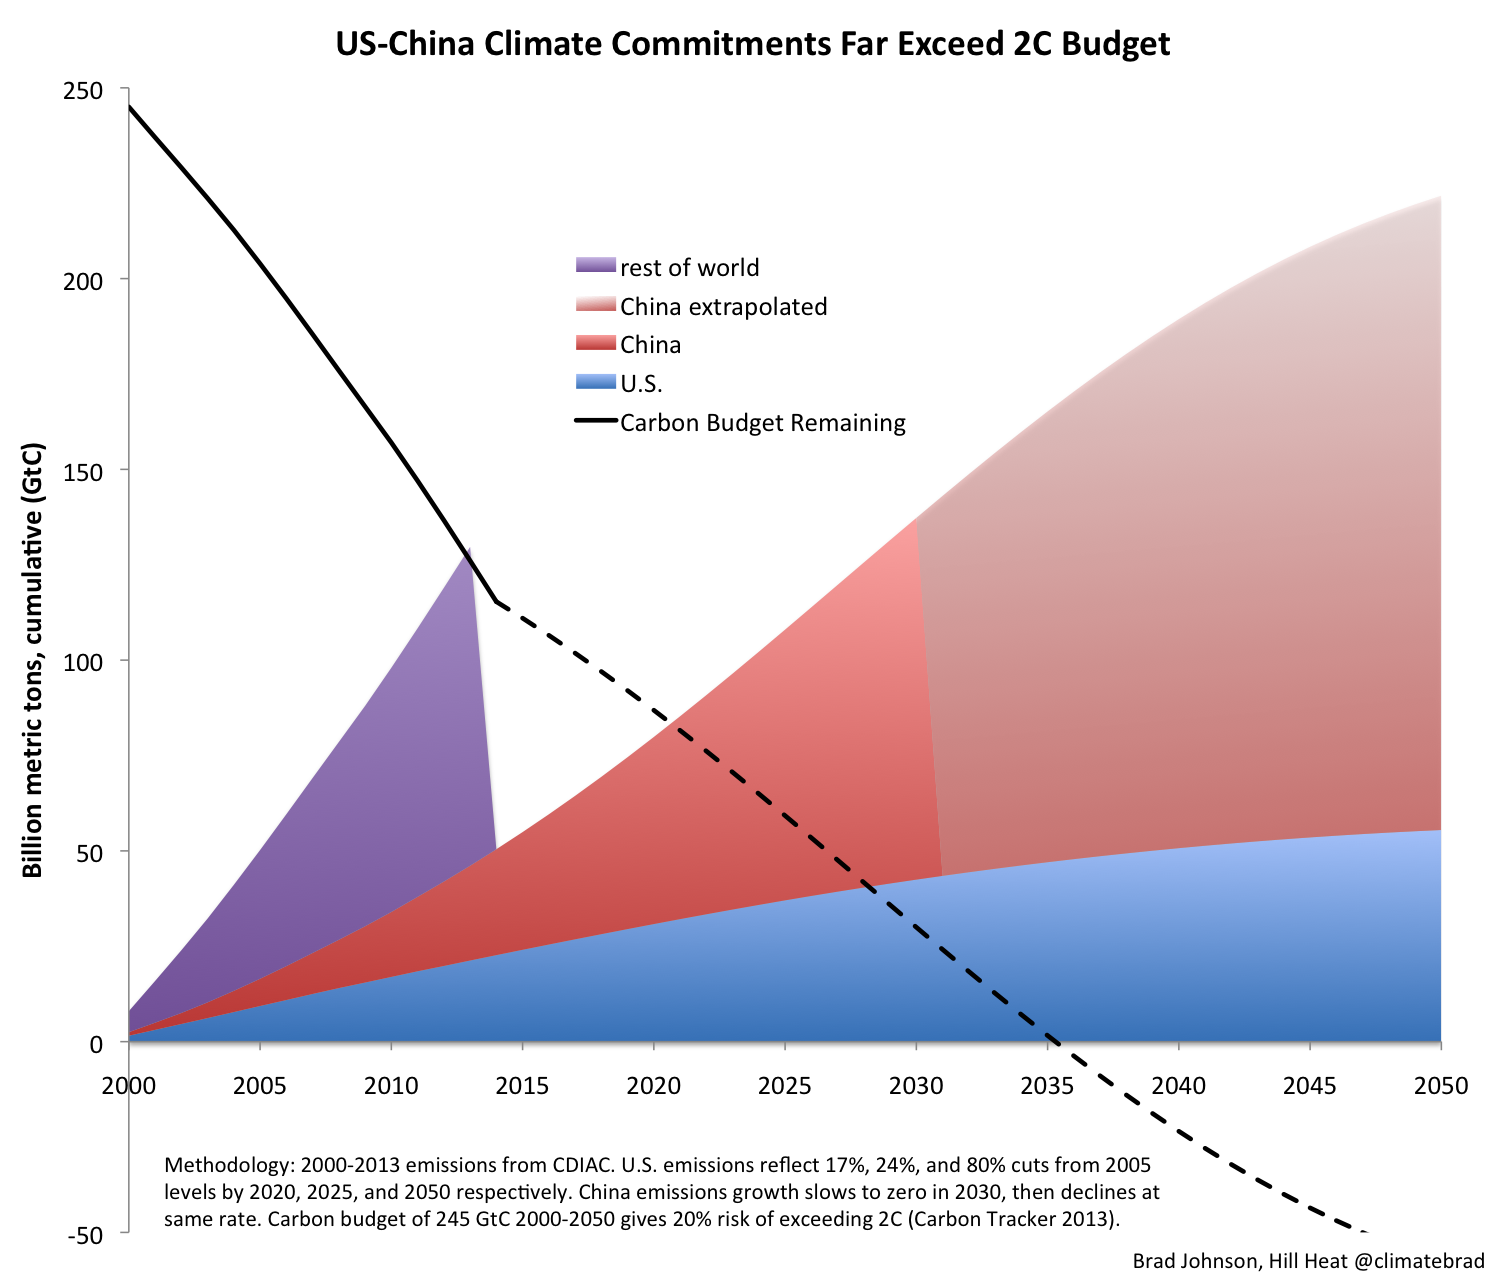 US-China Climate Commitments Far Exceed Budget